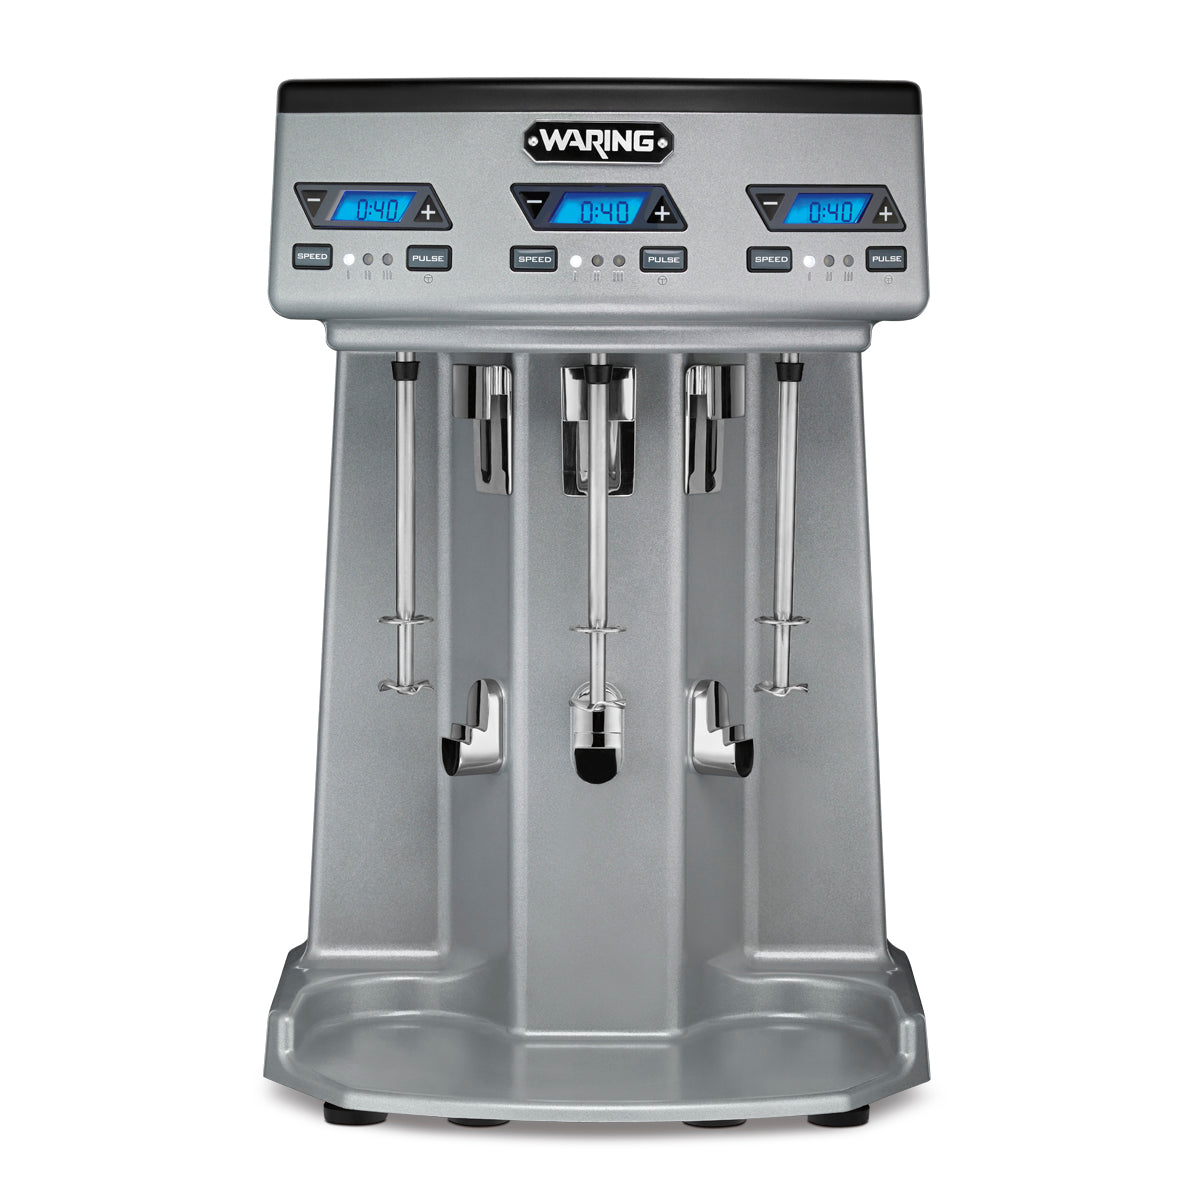 WDM360TX Heavy-Duty Triple-Spindle Drink Mixer with Timer & Hands Free Operation by Waring Commercial